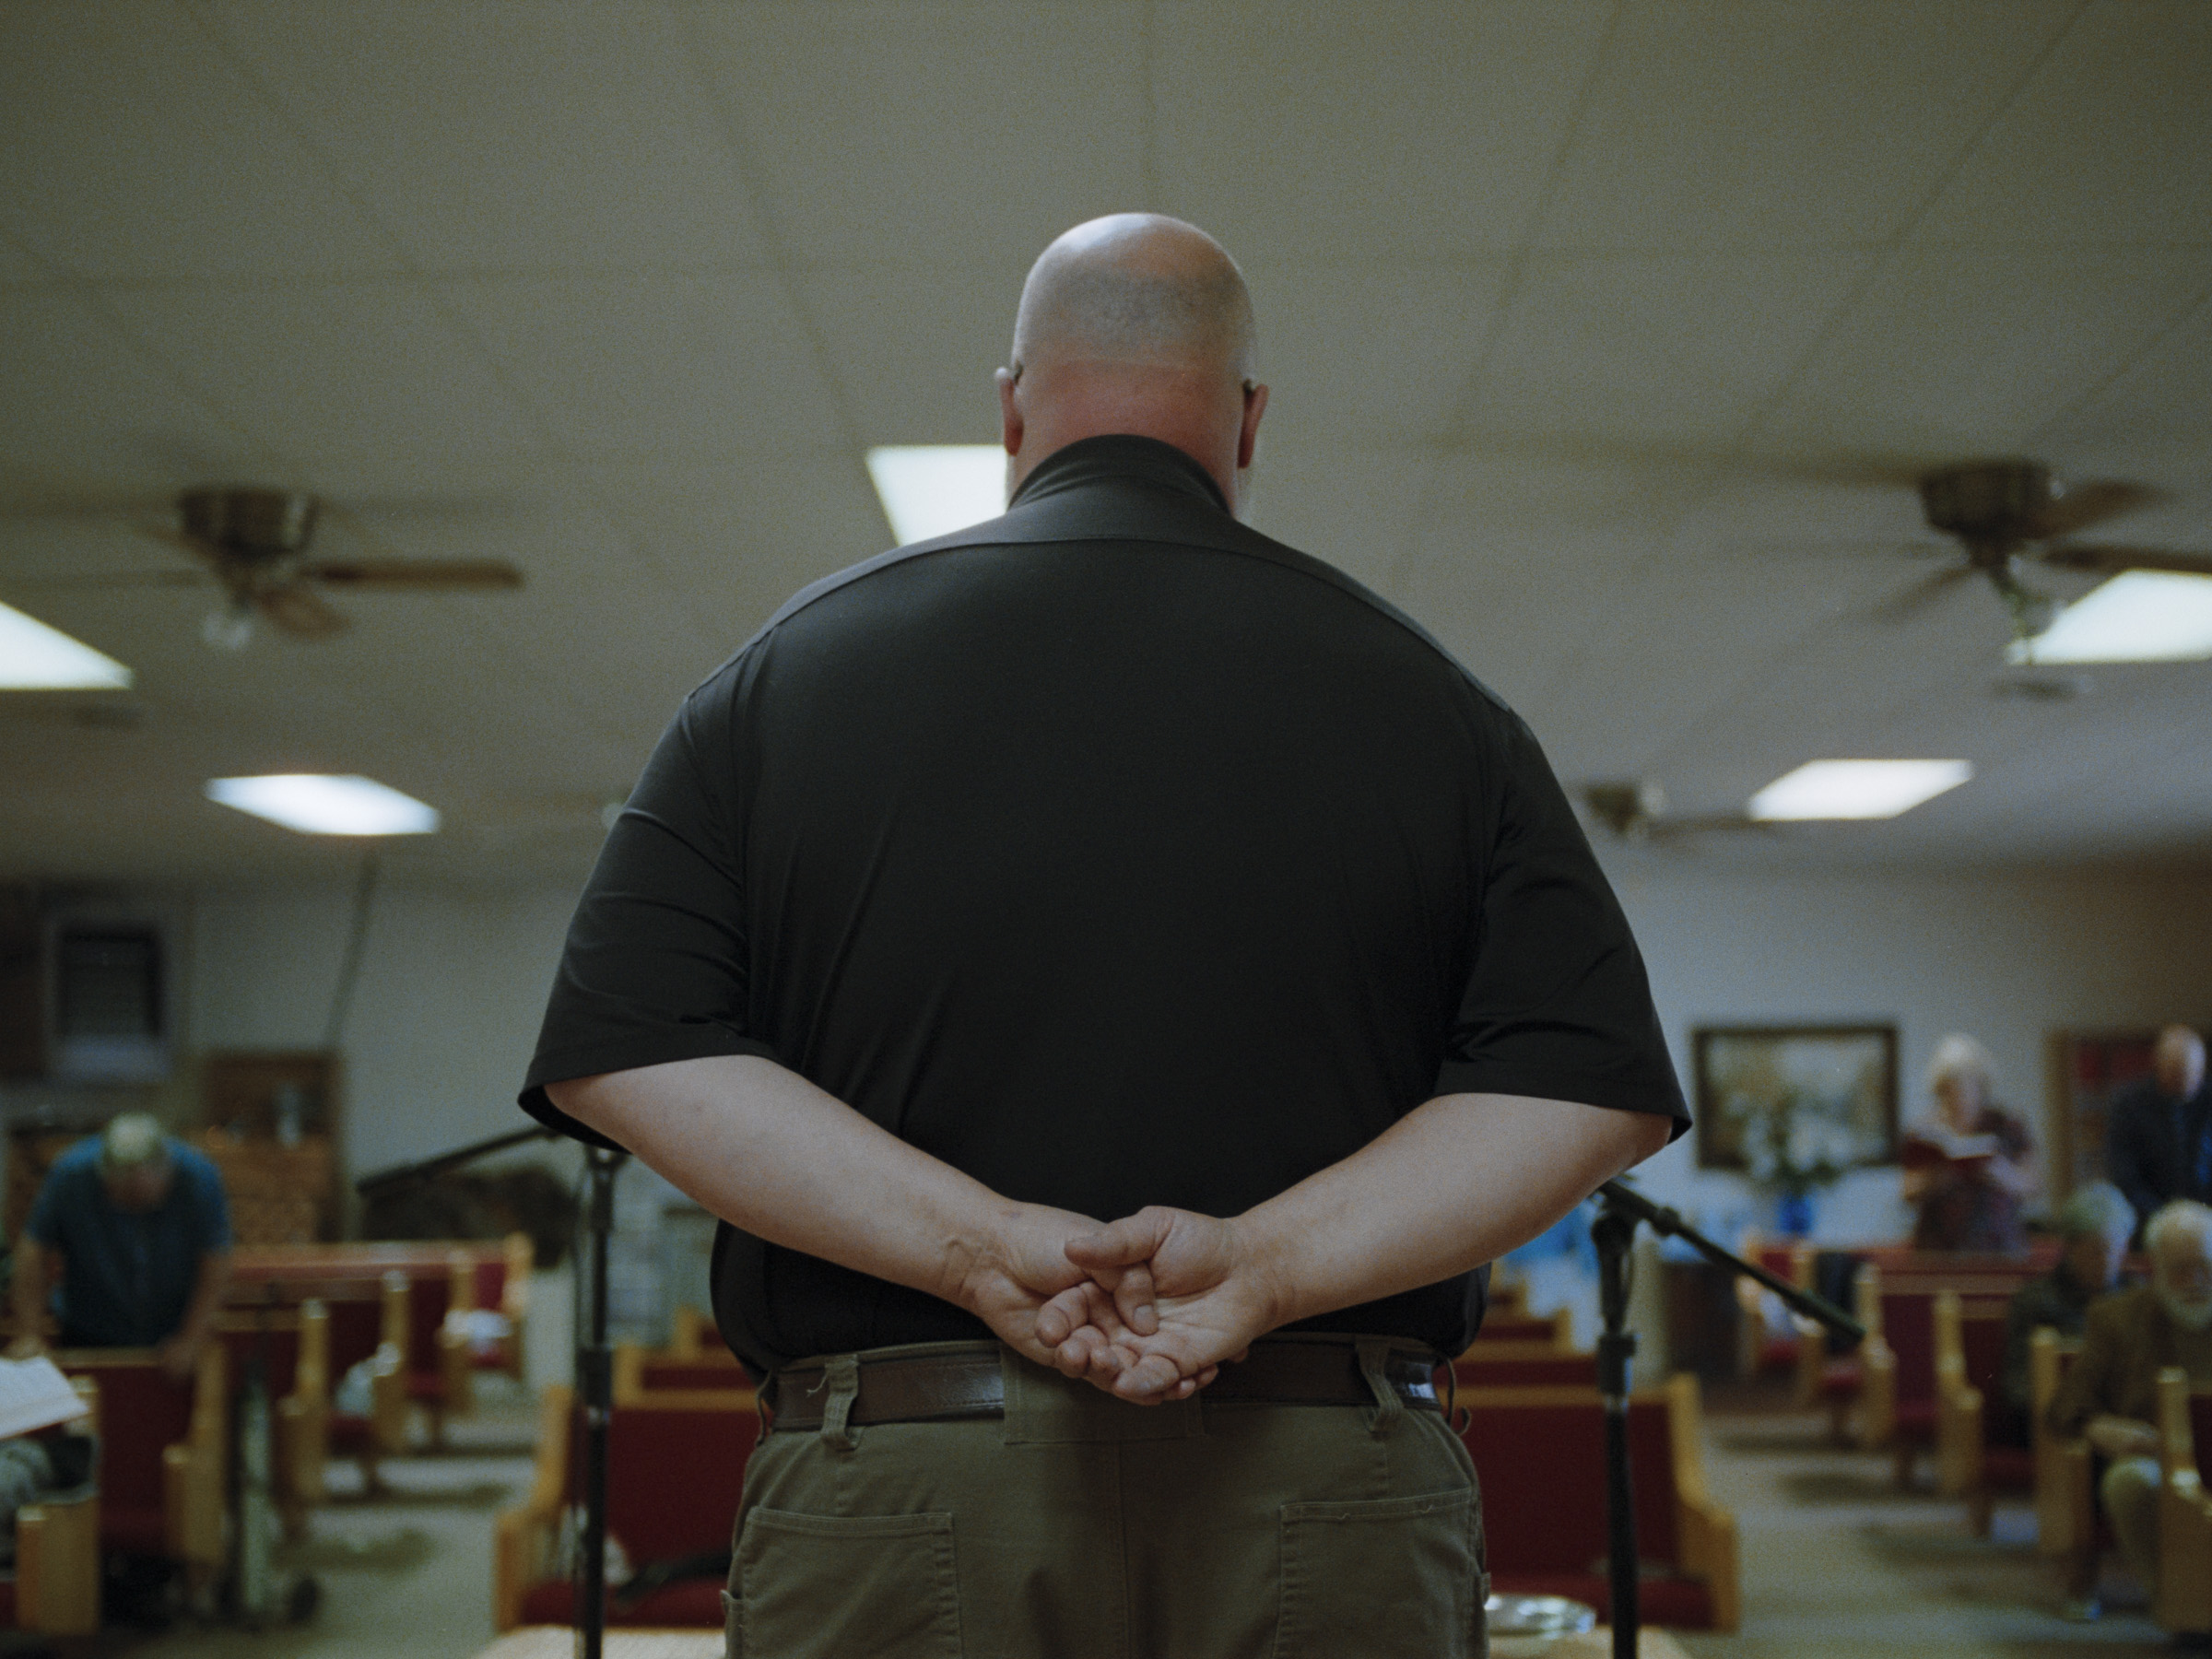 Rusty Stewart, 47, a pastor at the First Baptist Church of Quemado, used to wear a gun on his hip that he described as his “backup plan.” After a suicide attempt, he was placed under observation at a hospital and told that “people who commit suicide go straight to hell,” he remembers. Stewart now uses his position at the pulpit to try to dispel stigma about mental health. “I think most depressed, suicidal people are probably closer to God than most Christians. I know because they’re the ones that are really reaching out for help.” (Brandon Kapelow)